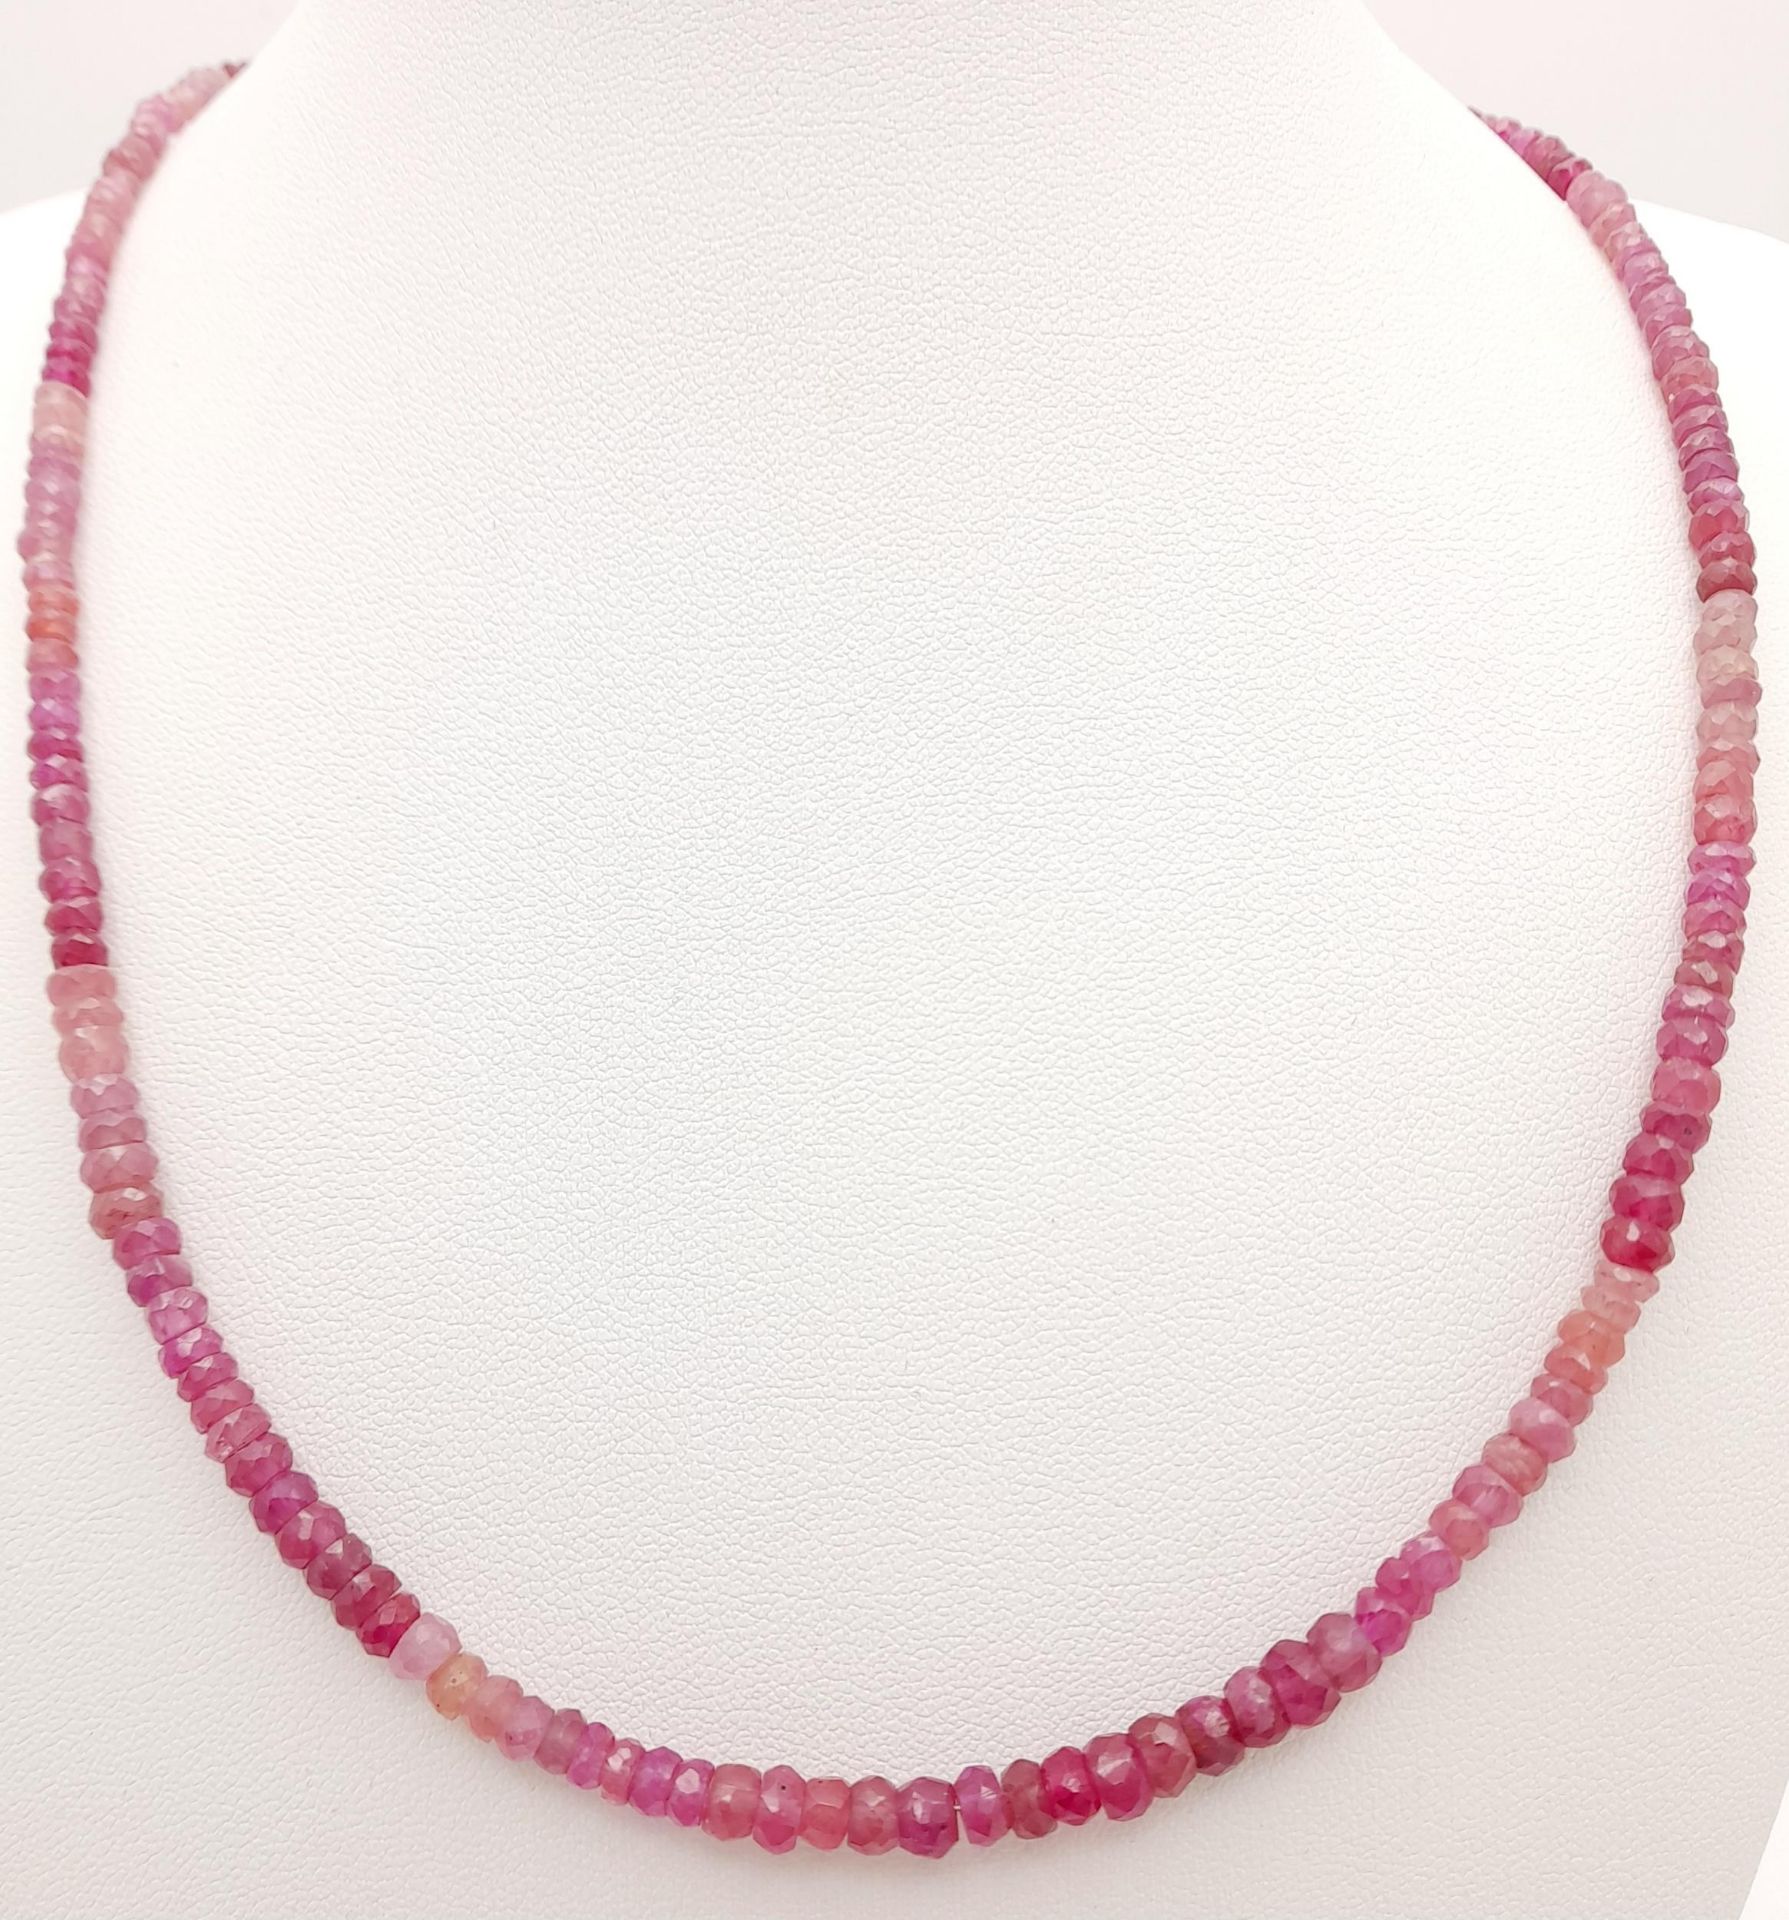 A 90ctw Ruby Rondelle Gemstone Single strand Necklace -with a Ruby and 925 Silver clasp. 44cm - Image 2 of 3